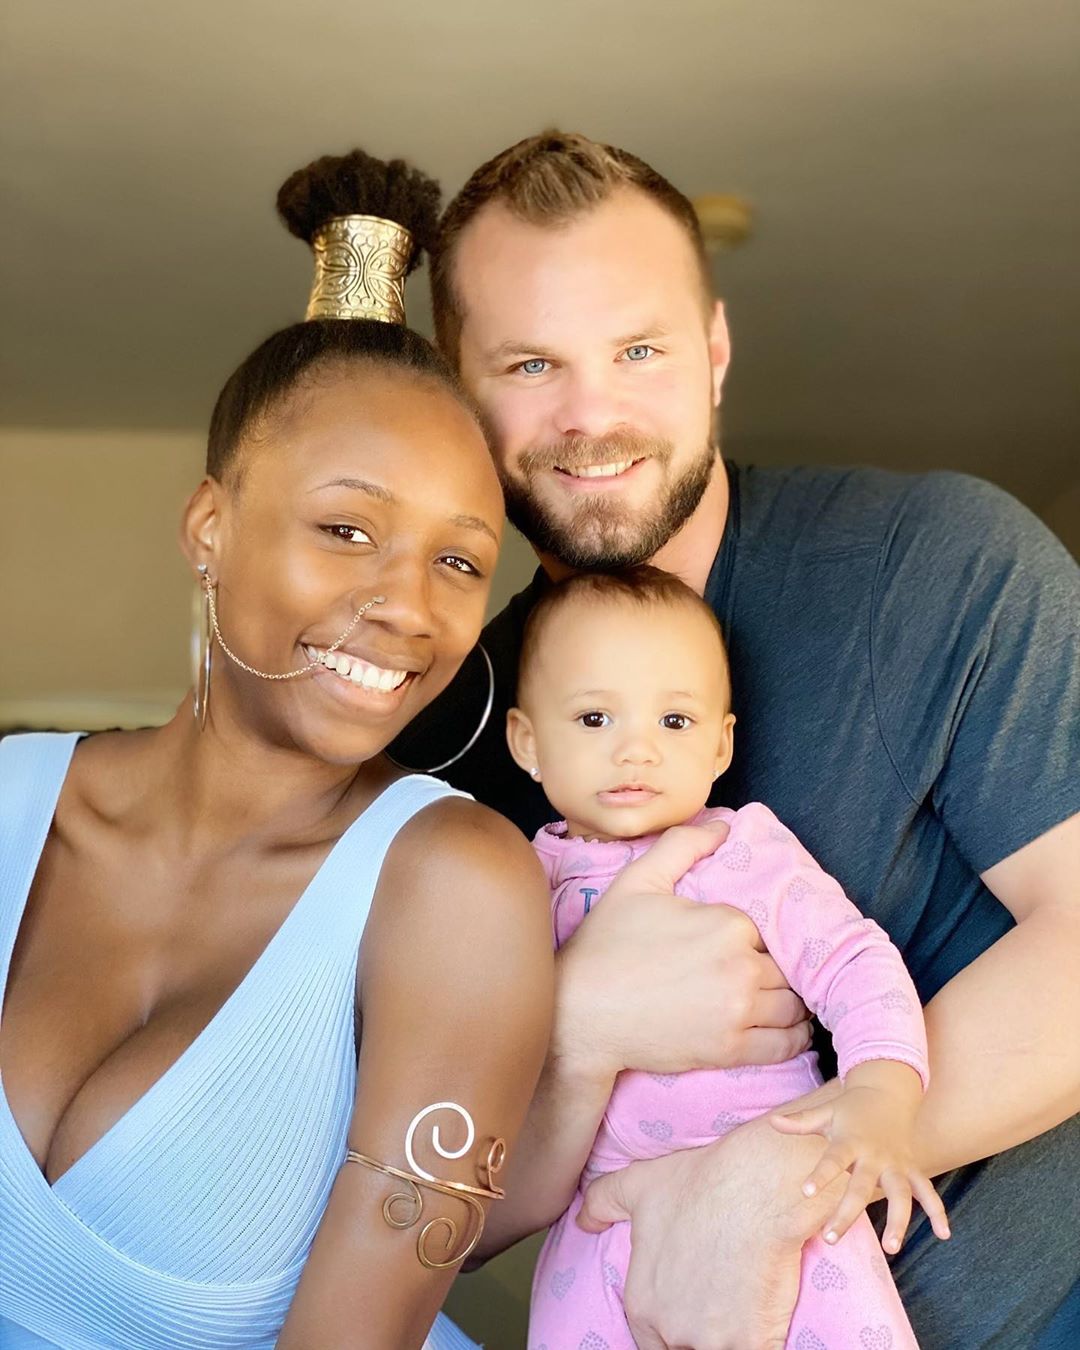 Dr. Justin Dean: Korra Obidi’s cheating at five months pregnant led to our divorce